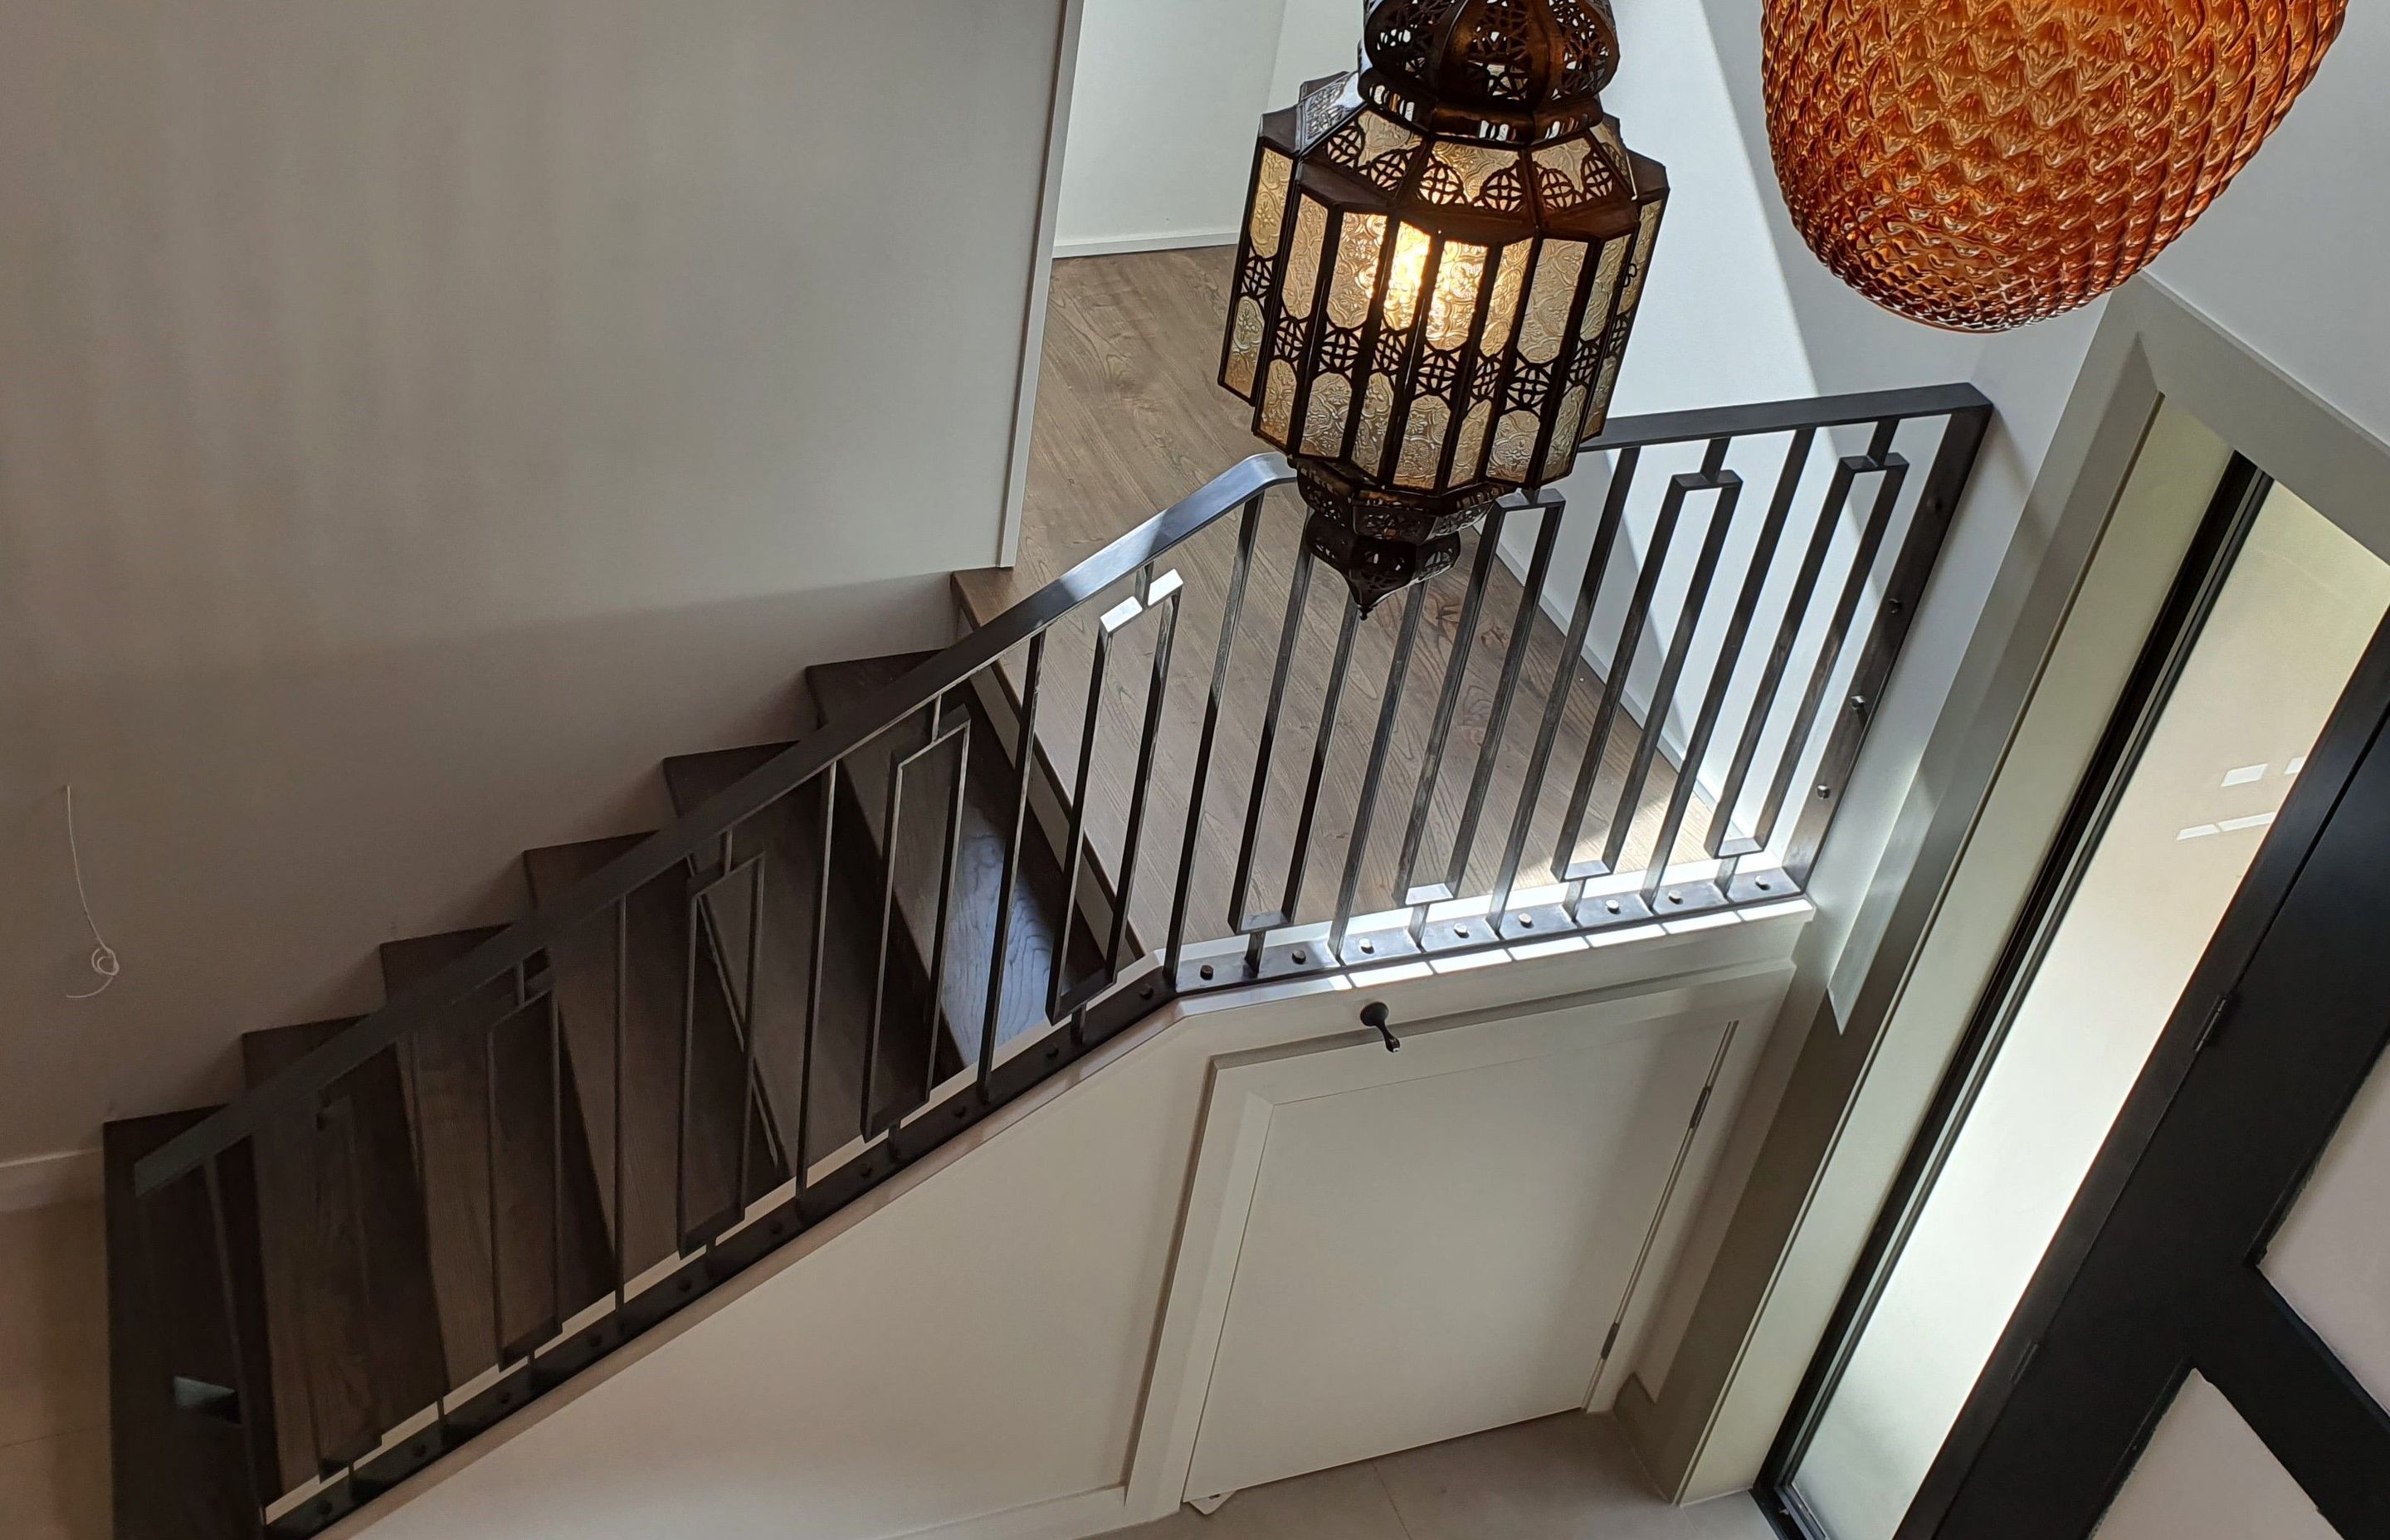 One recent project called for custom indoor stair banisters.